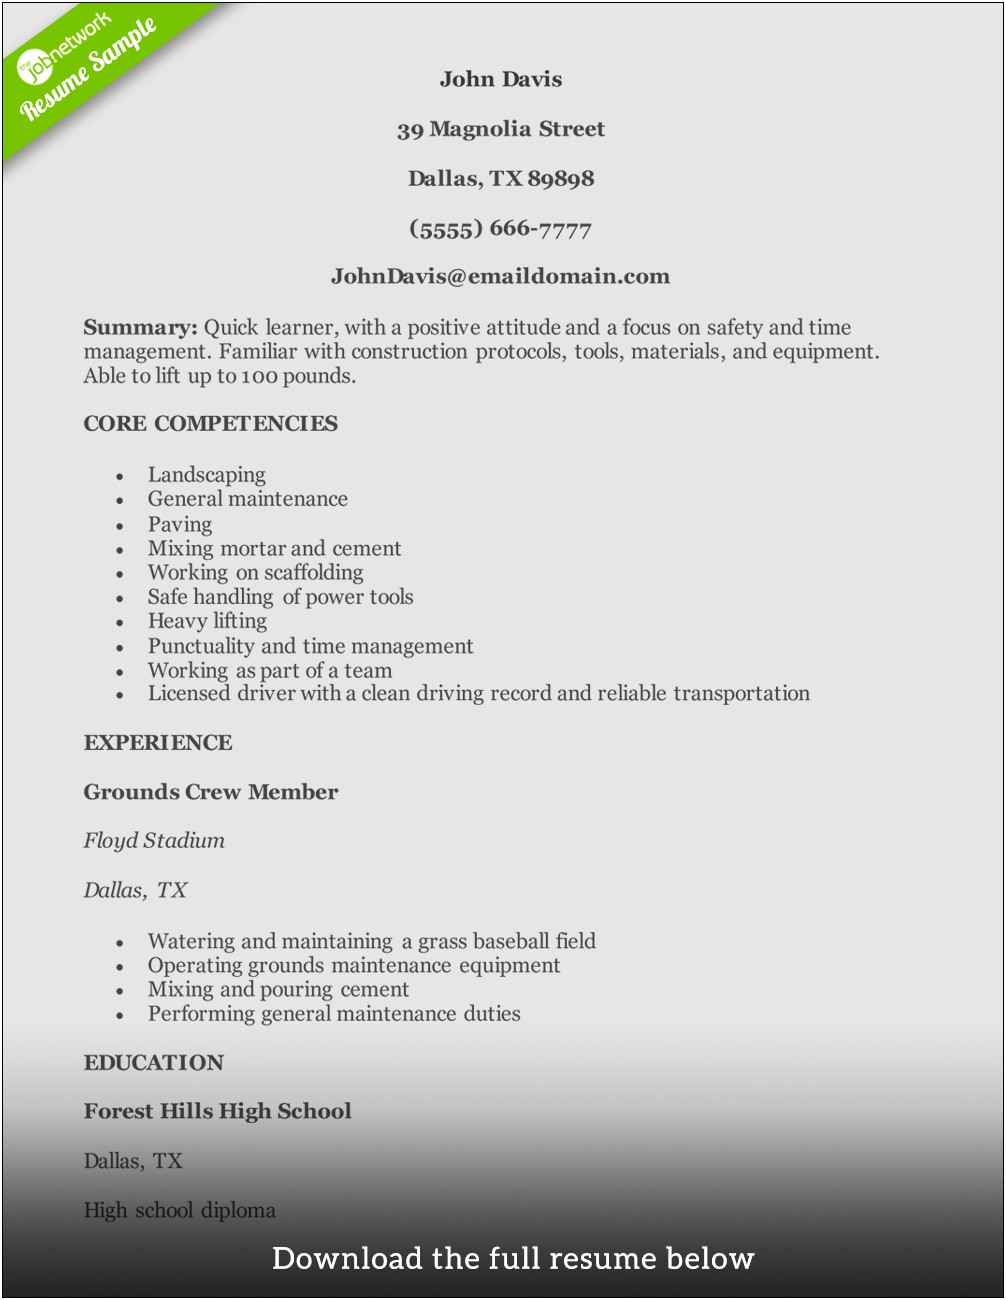 Resume Summary Example For Construction